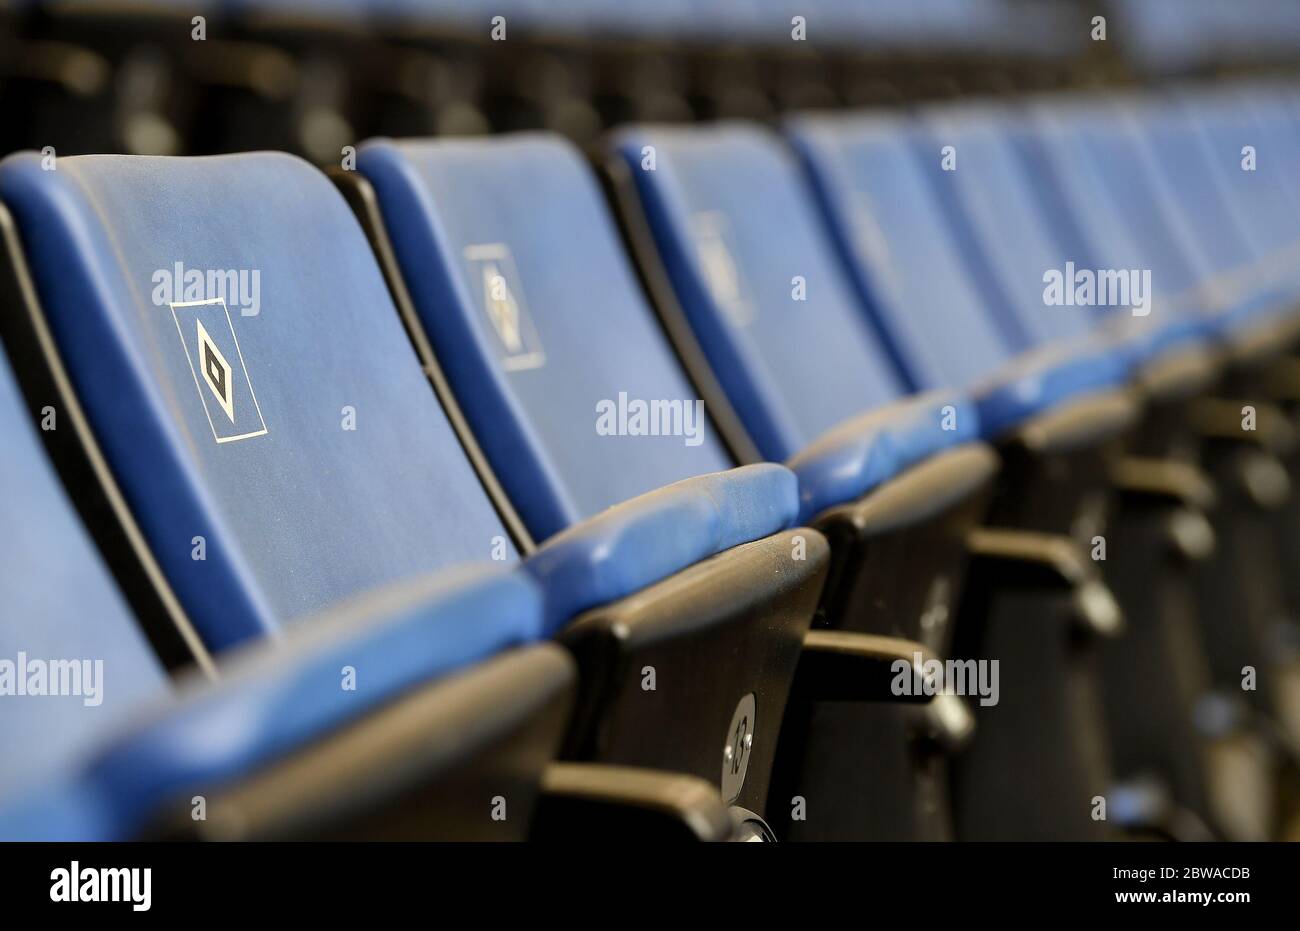 Karlsruhe, Germany. 31st May, 2020. Football 2nd Bundesliga, 29th matchday, Hamburger SV - SV Wehen Wiesbaden in the Volksparkstadion. View into the empty rows of seats before the game starts. Credit: Stuart Franklin/Getty Images Europe/Pool/dpa - IMPORTANT NOTE: In accordance with the regulations of the DFL Deutsche Fußball Liga and the DFB Deutscher Fußball-Bund, it is prohibited to exploit or have exploited in the stadium and/or from the game taken photographs in the form of sequence images and/or video-like photo series./dpa/Alamy Live News Stock Photo